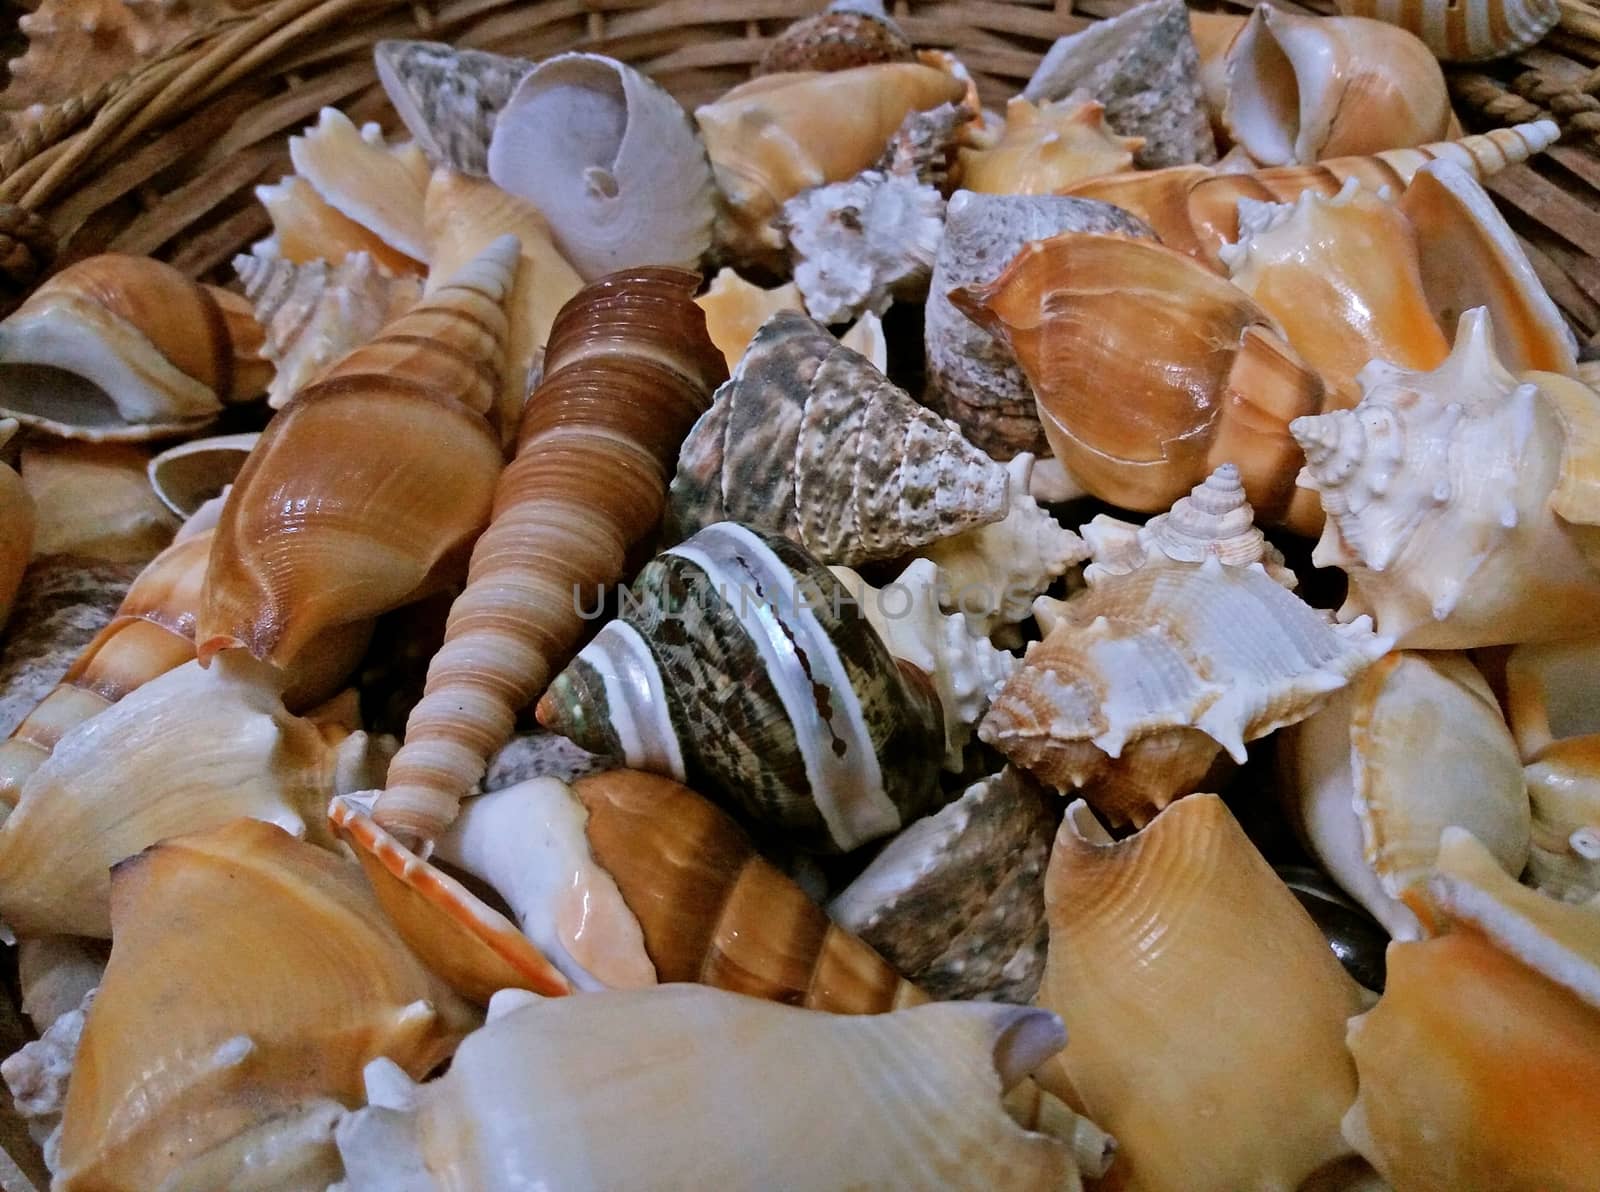 A lot of beautiful shells, Great souvenir from the sea.